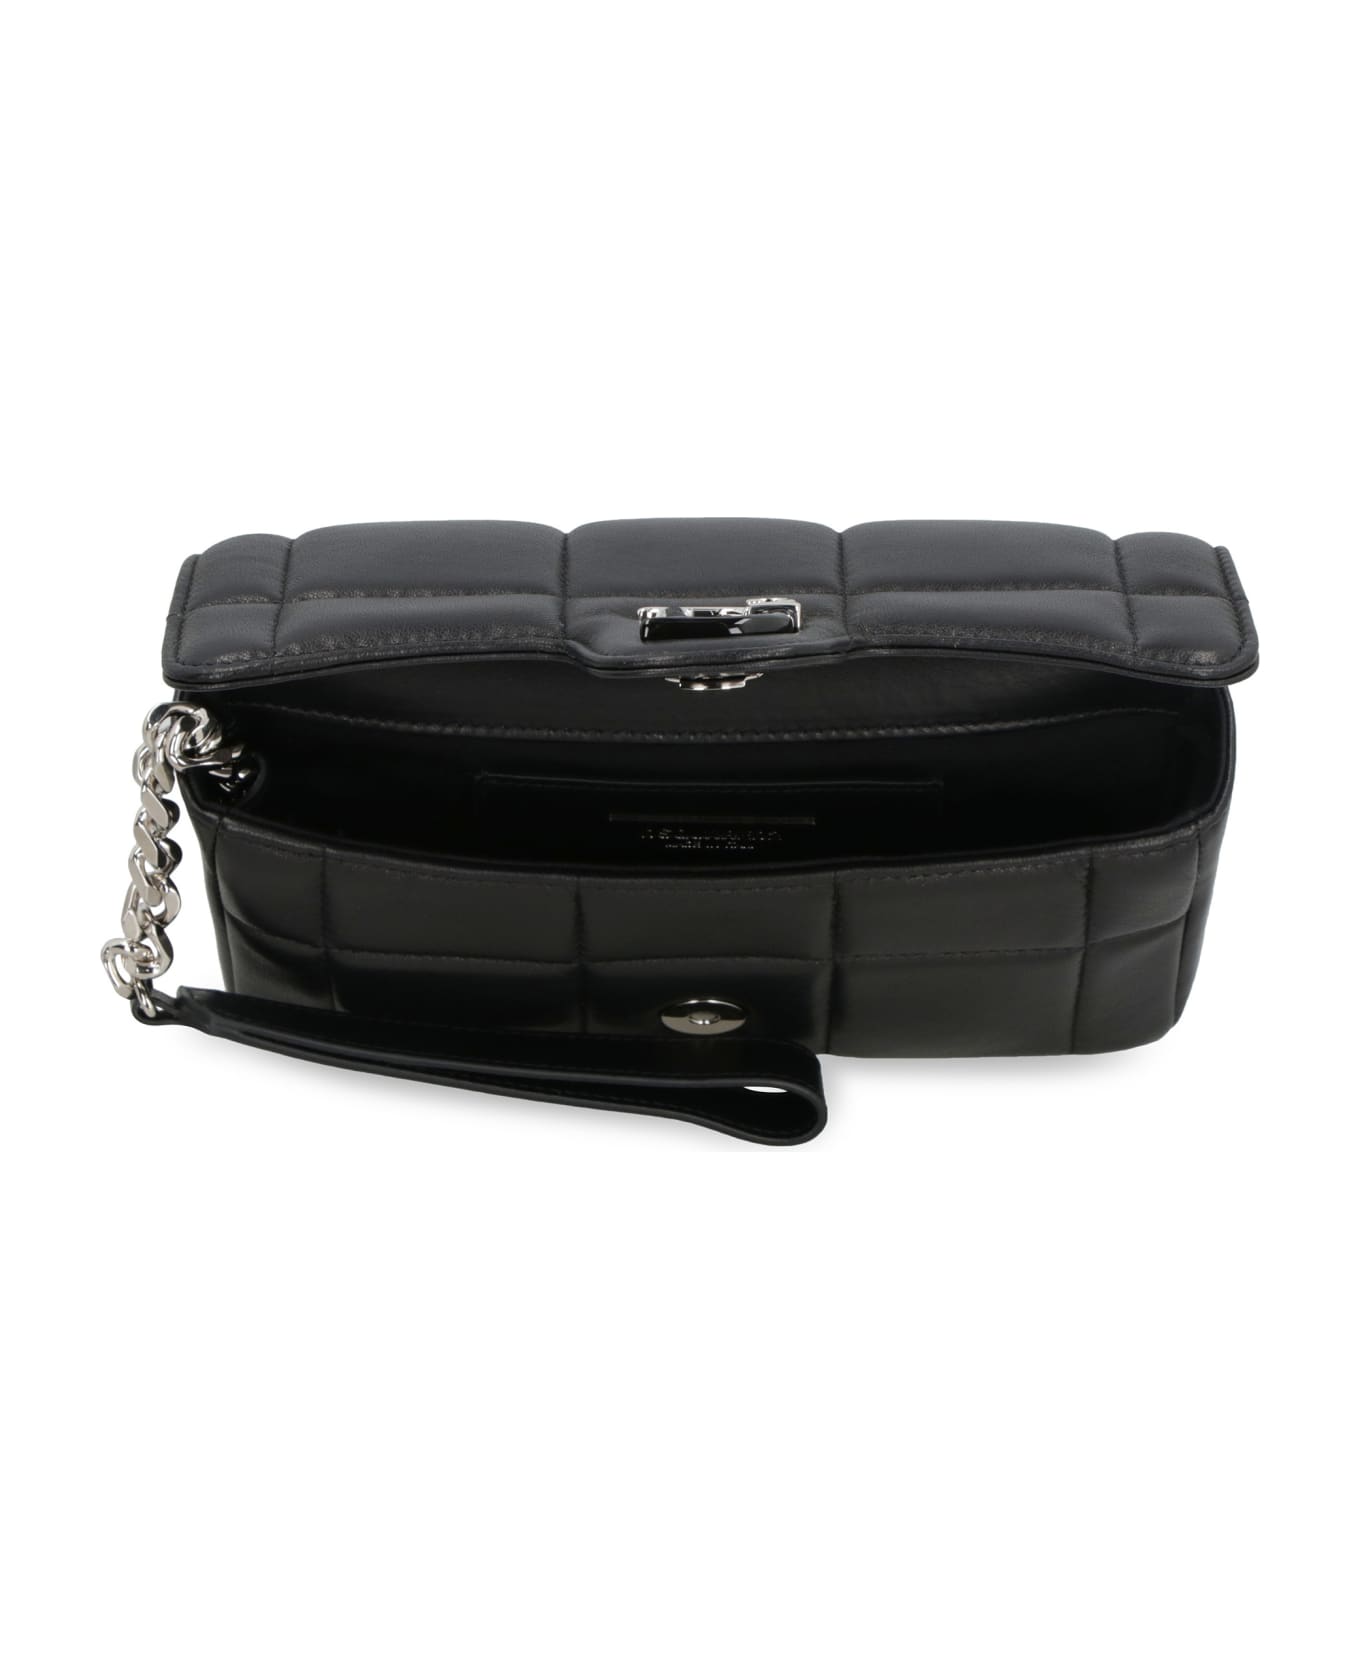 Dsquared2 D2 Statement Leather Clutch - black ショルダーバッグ